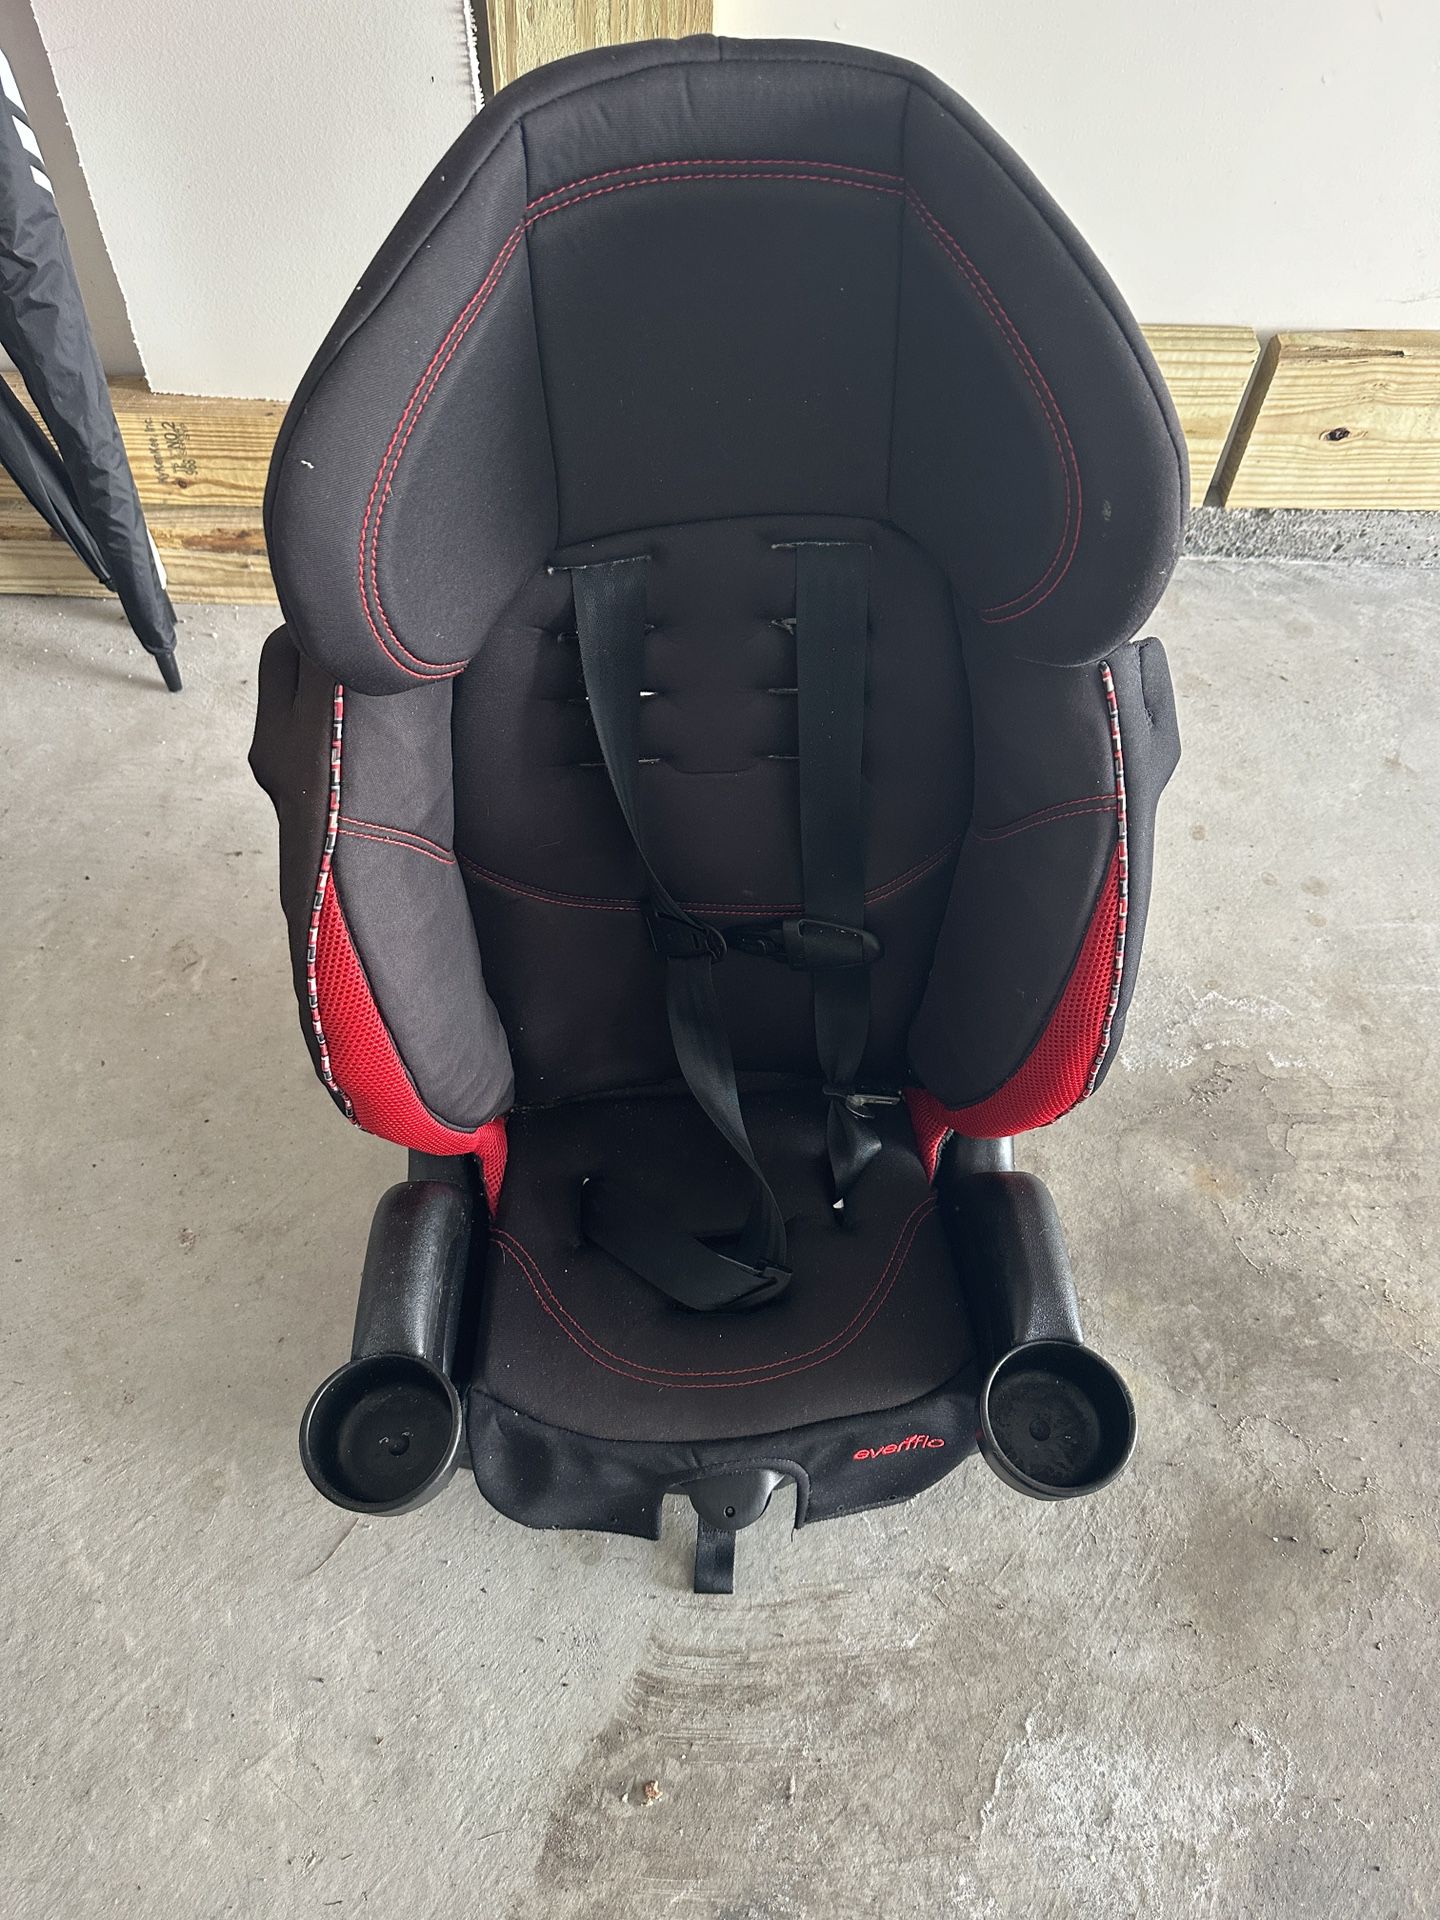 Free car Seat And Booster Seat